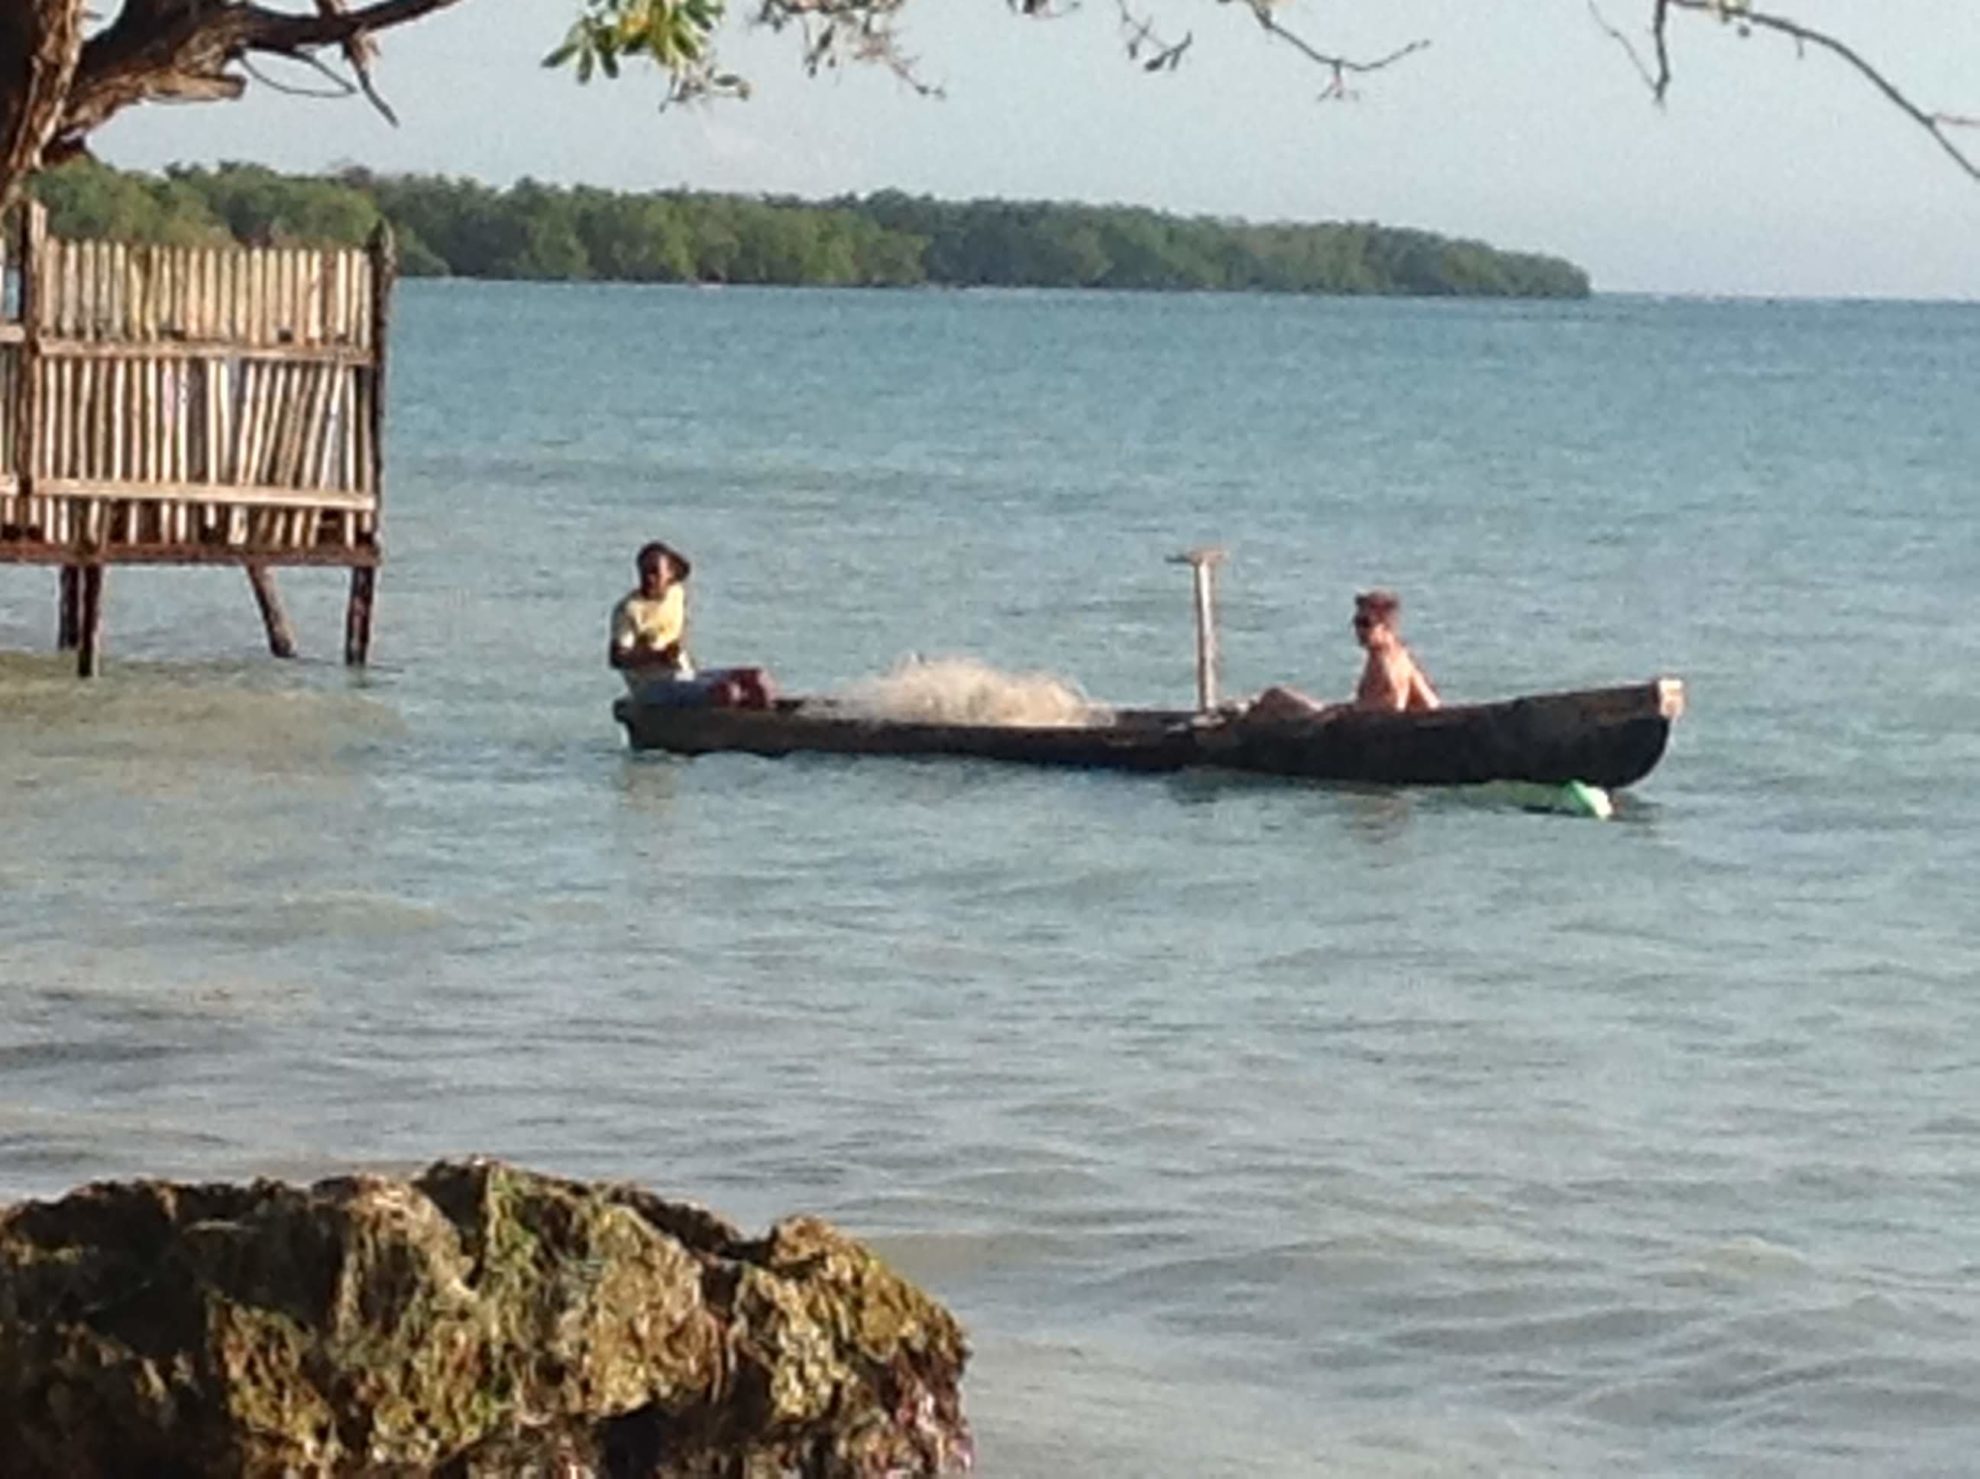 Two people sit in a canoe near a dock on the sea.